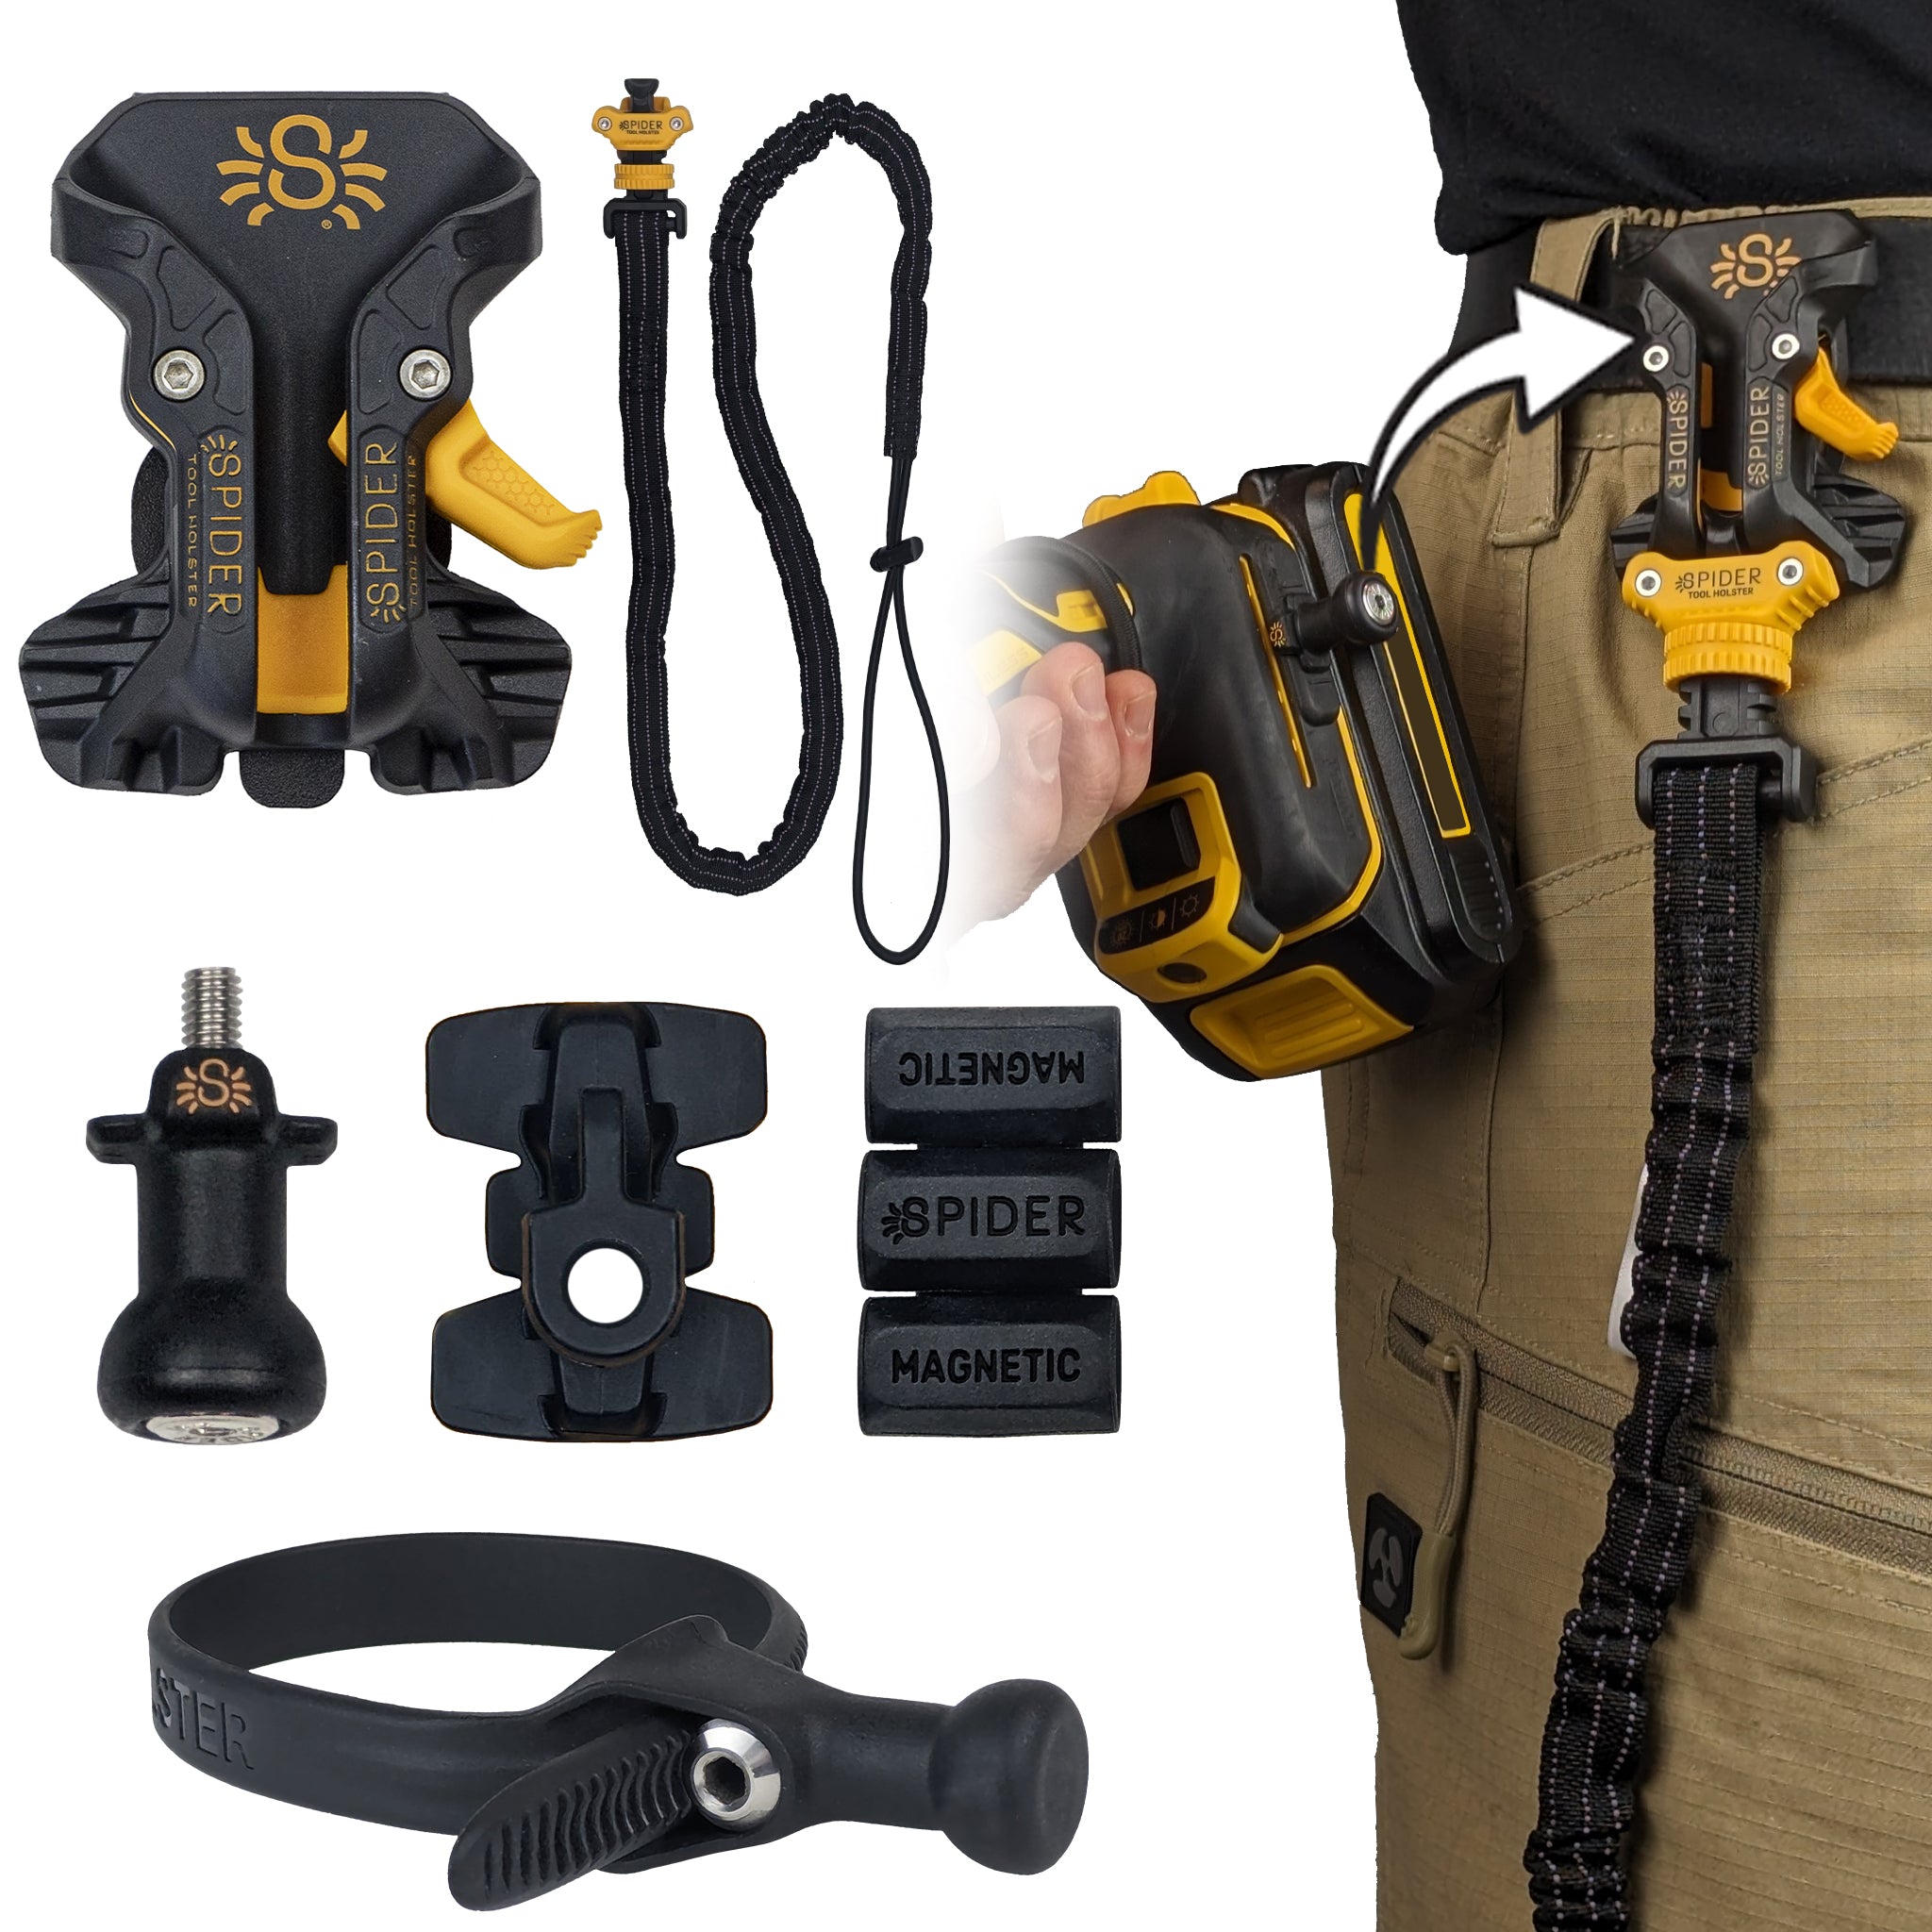 Spider Tool Holster - The quick-draw solution for carrying your tools!